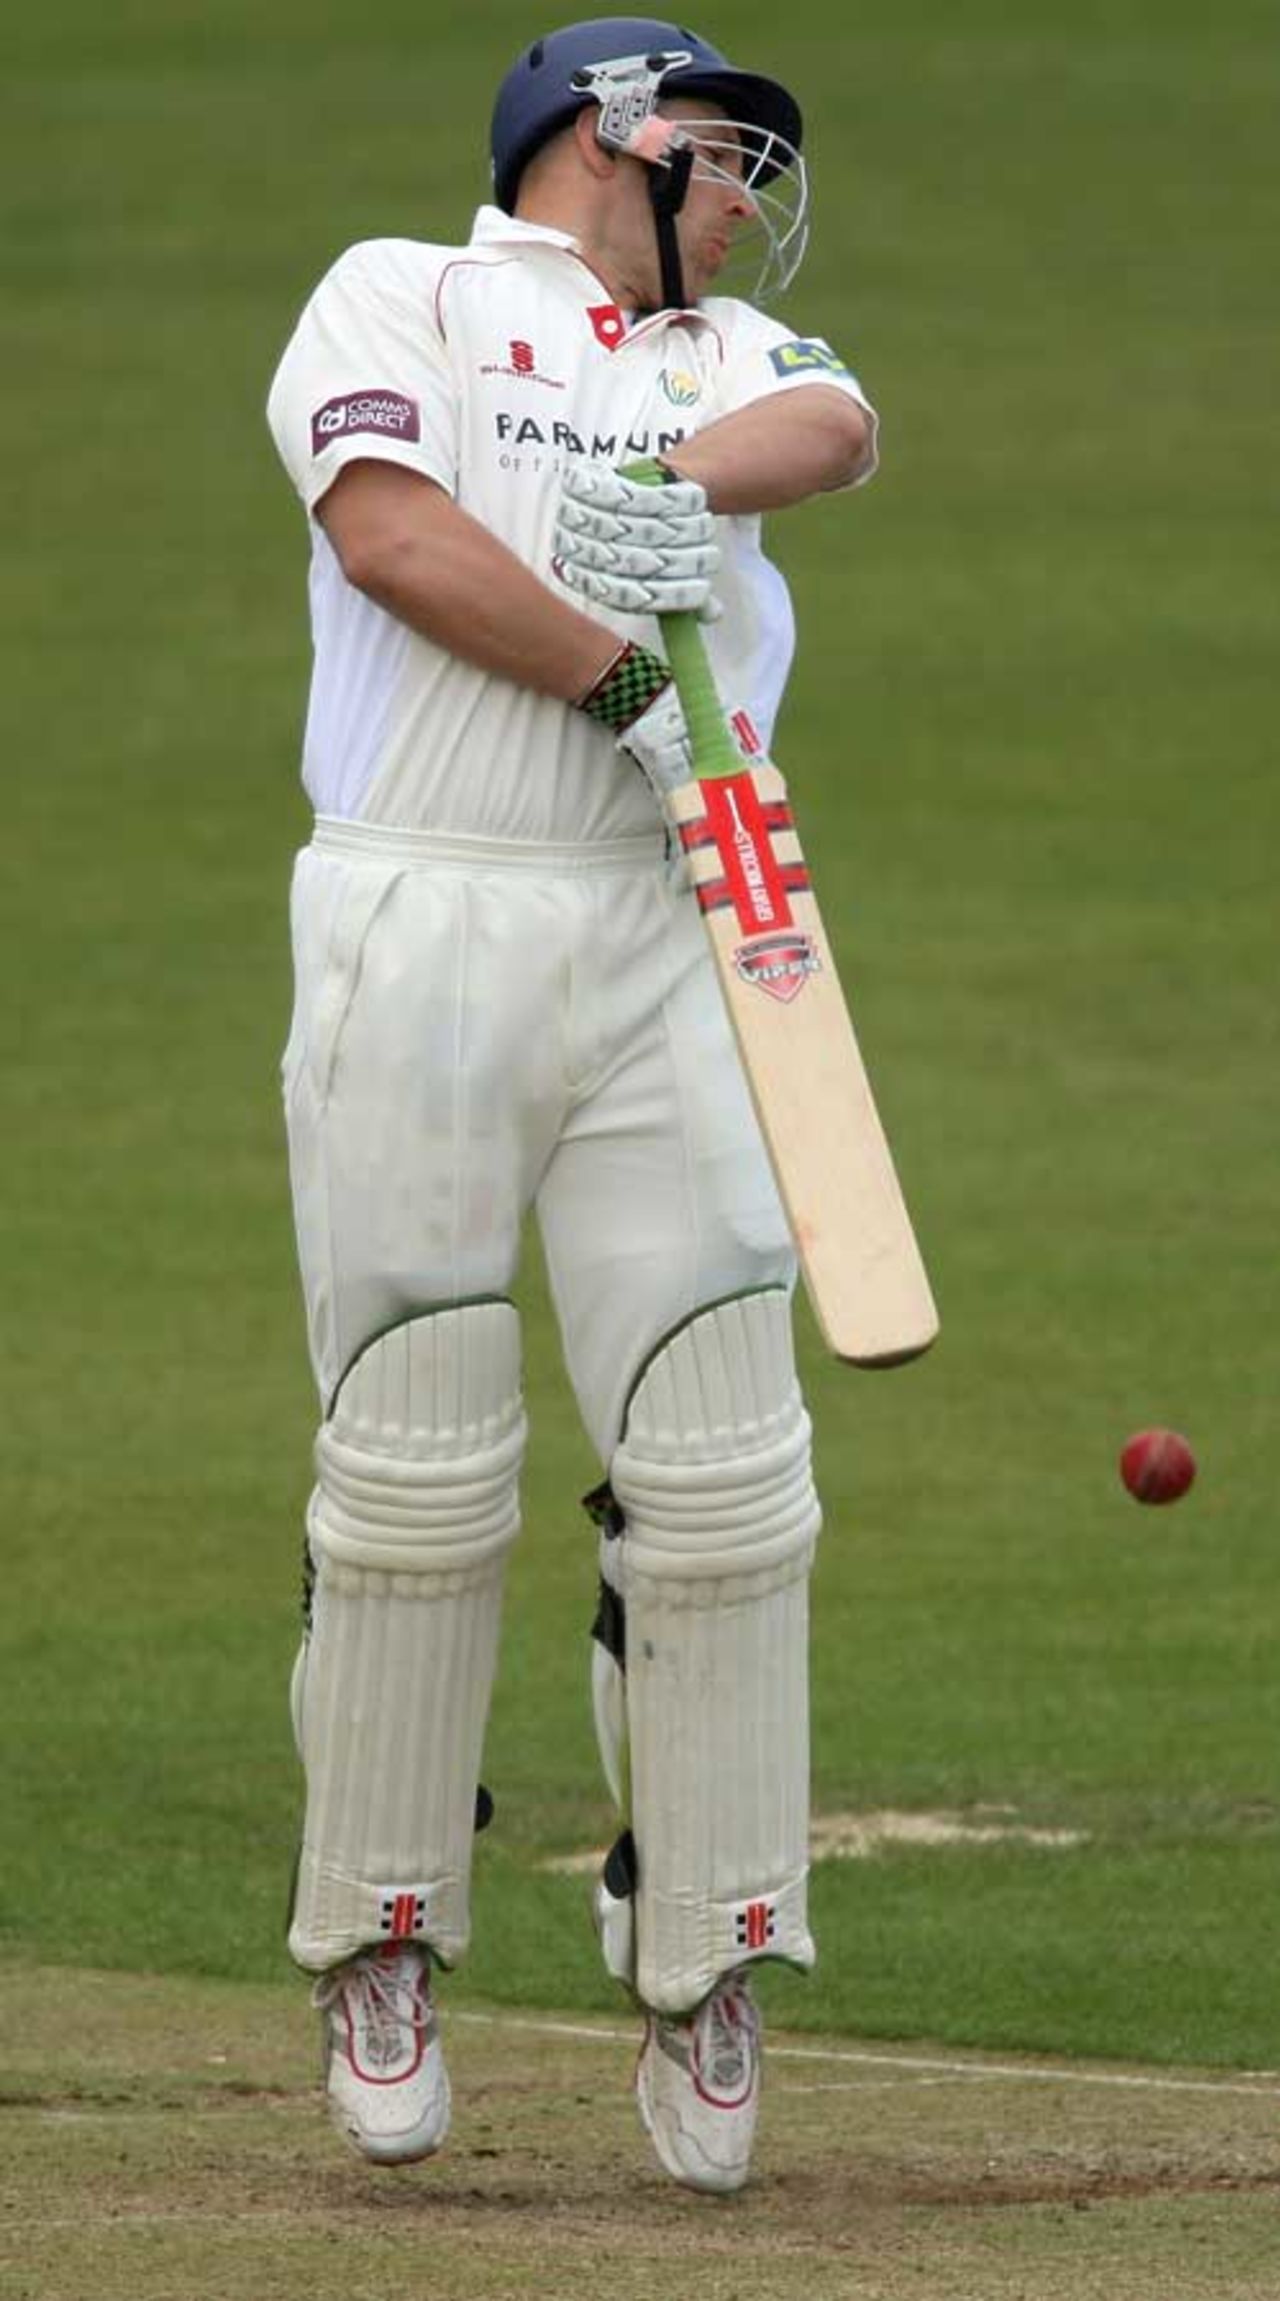 Alex Wharf takes a blow during his innings, Gloucestershire v Glamorgan, County Championship, Bristol, May 1, 2008